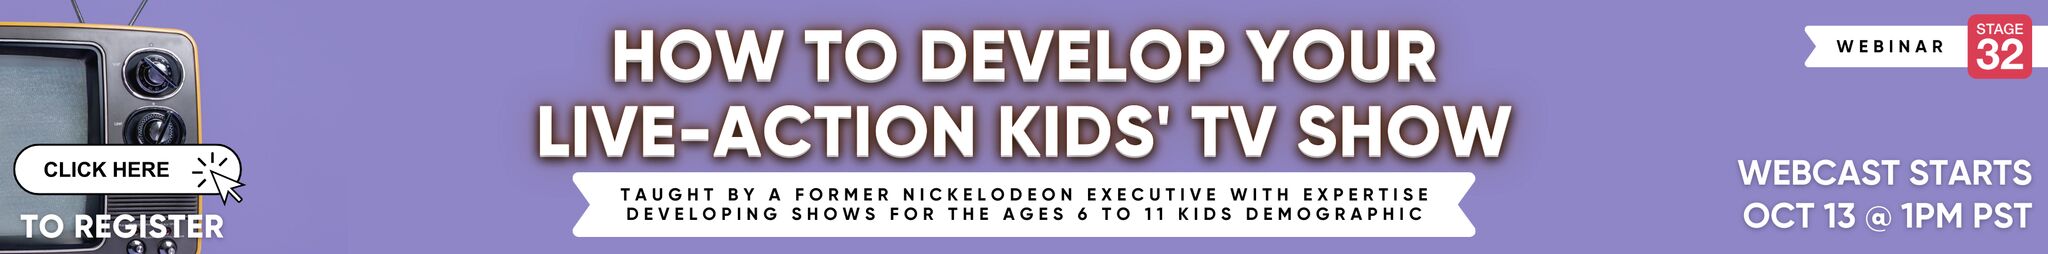 How To Develop Your Live-Action Kids' TV